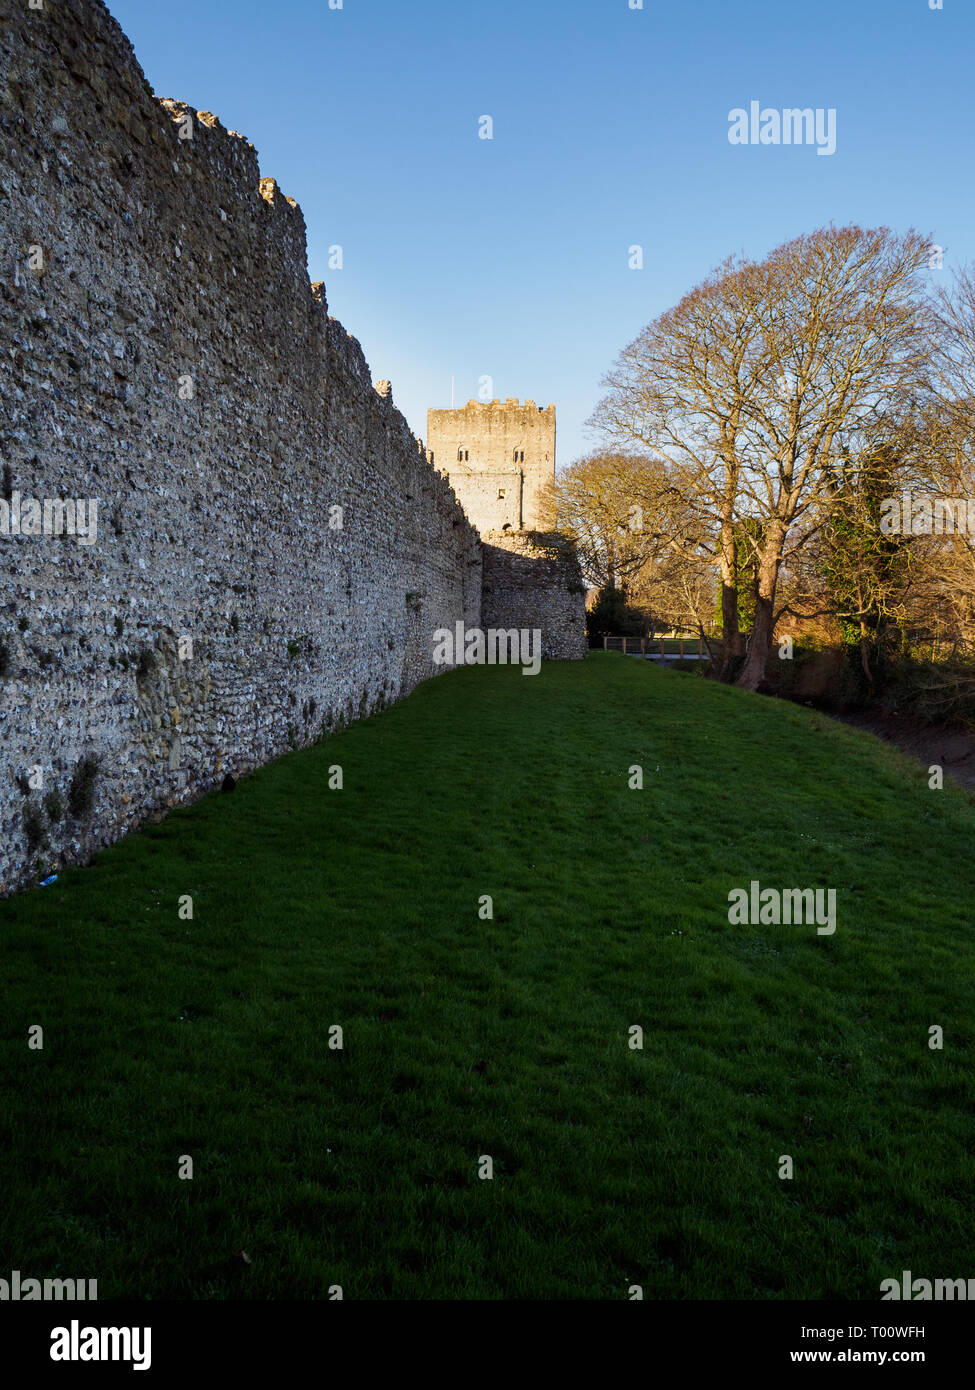 Photograph of the walls and tower of Porchester castle, Portsmouth, Hampshire. Stock Photo